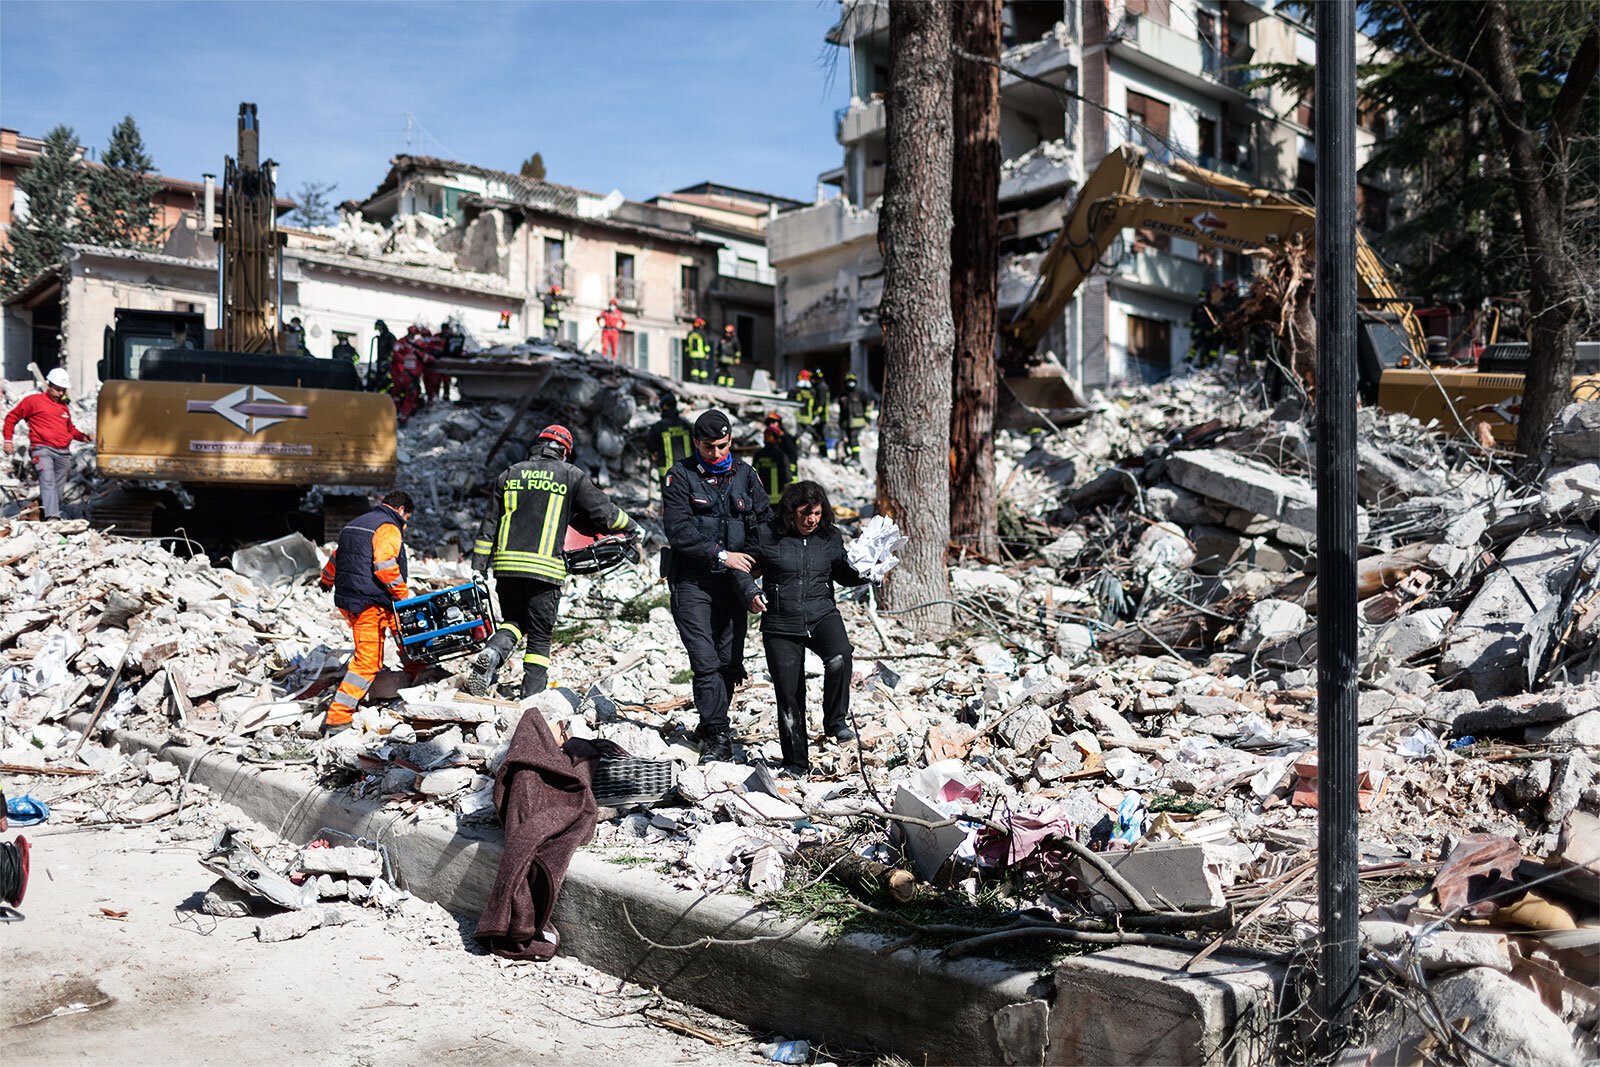  A Carabinieri officer helps a woman to walk over the debris of a building collapsed after a 6.3 Richter scale earthquake on Apr. 2009 in L’Aquila, Italy. 